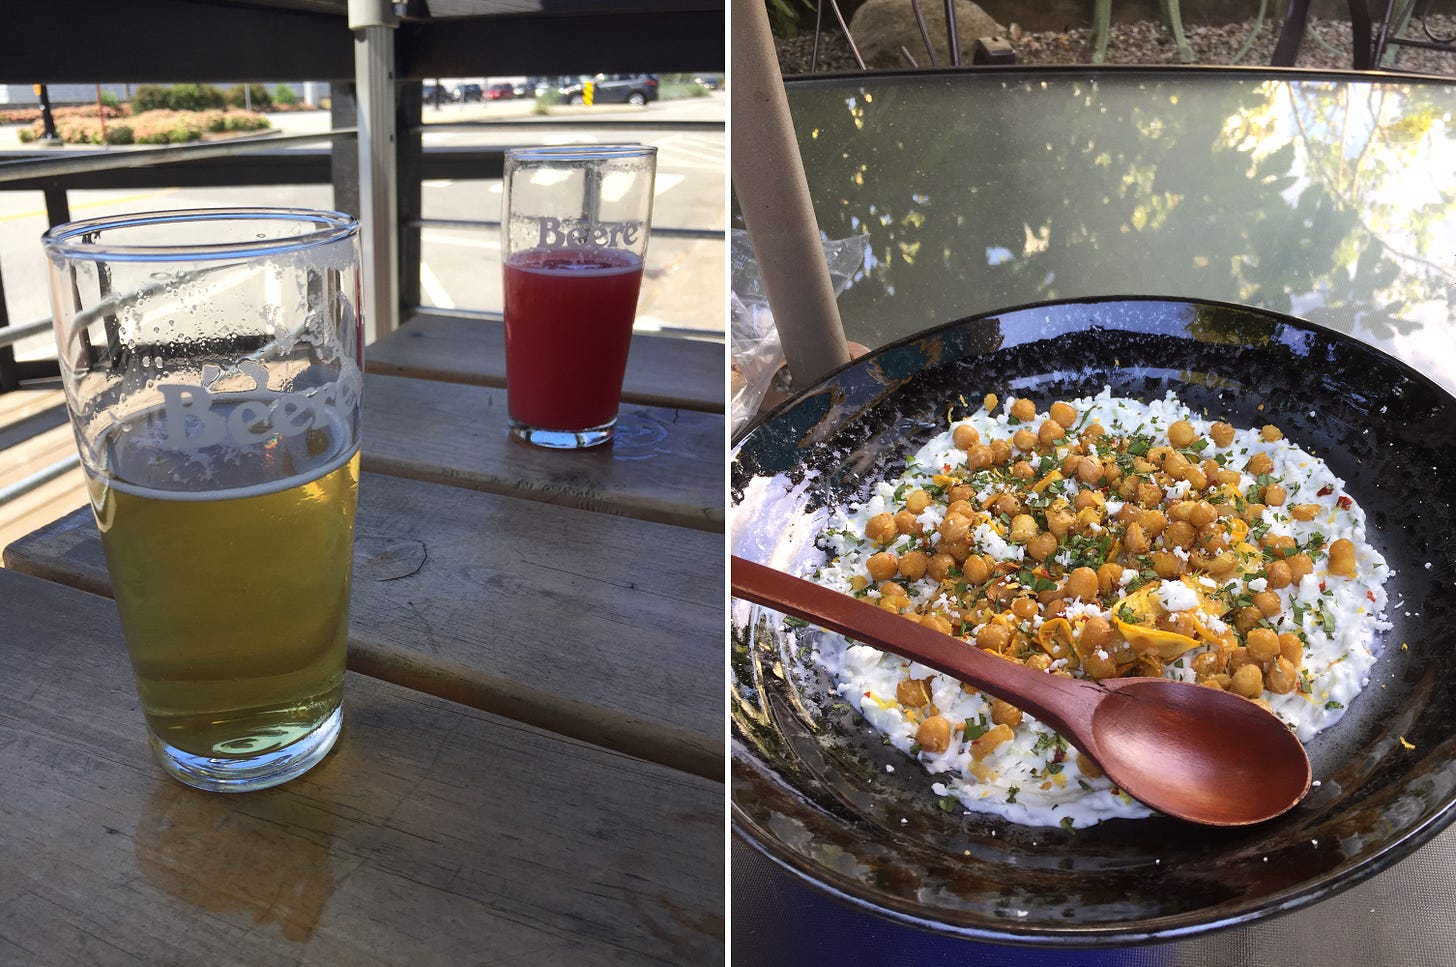 left image: a wooden picnic table with a glass of lager in the foreground and a pink sour in the background. 'Beere' is in white text on both glasses. right image: a black bowl filled with tzatziki, and topped with fried chickpeas, herbs, and yellow zucchini. A wooden spoon sits at an angle in the front of the bowl.